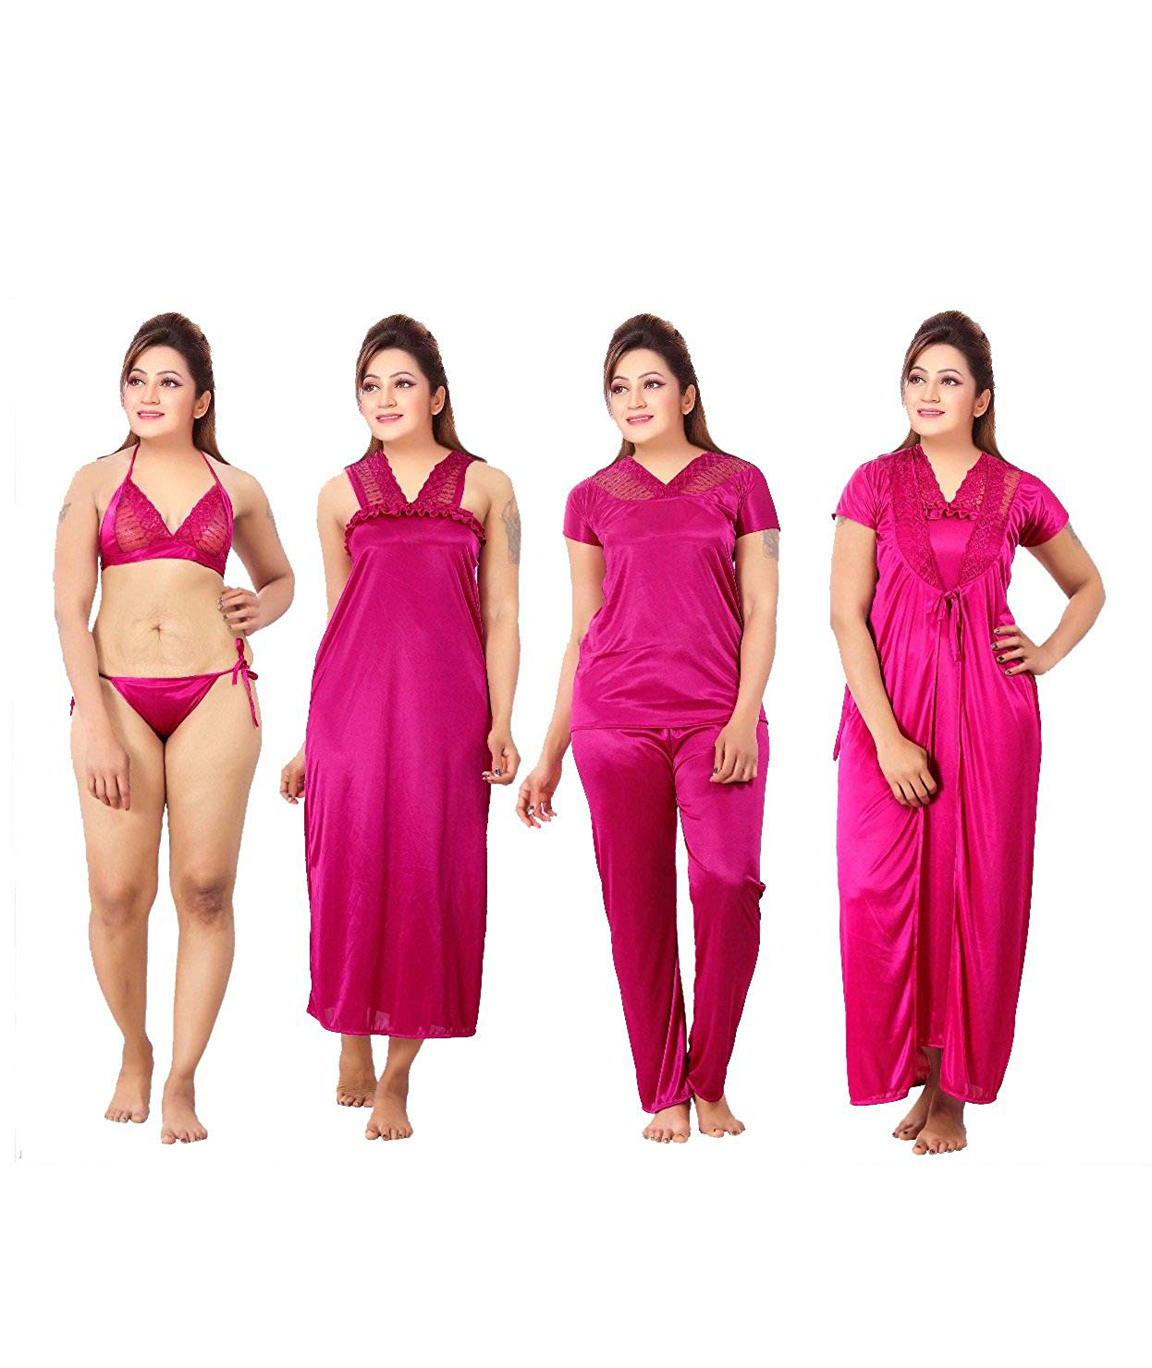 https://www.manthanonline.in/uploadImages/productimage/romaisa-women-s-satin-nighty-wrap-gown-top-pajama-bra-and-thong-free-size-pack-of-6-colour-magenta-z.jpg